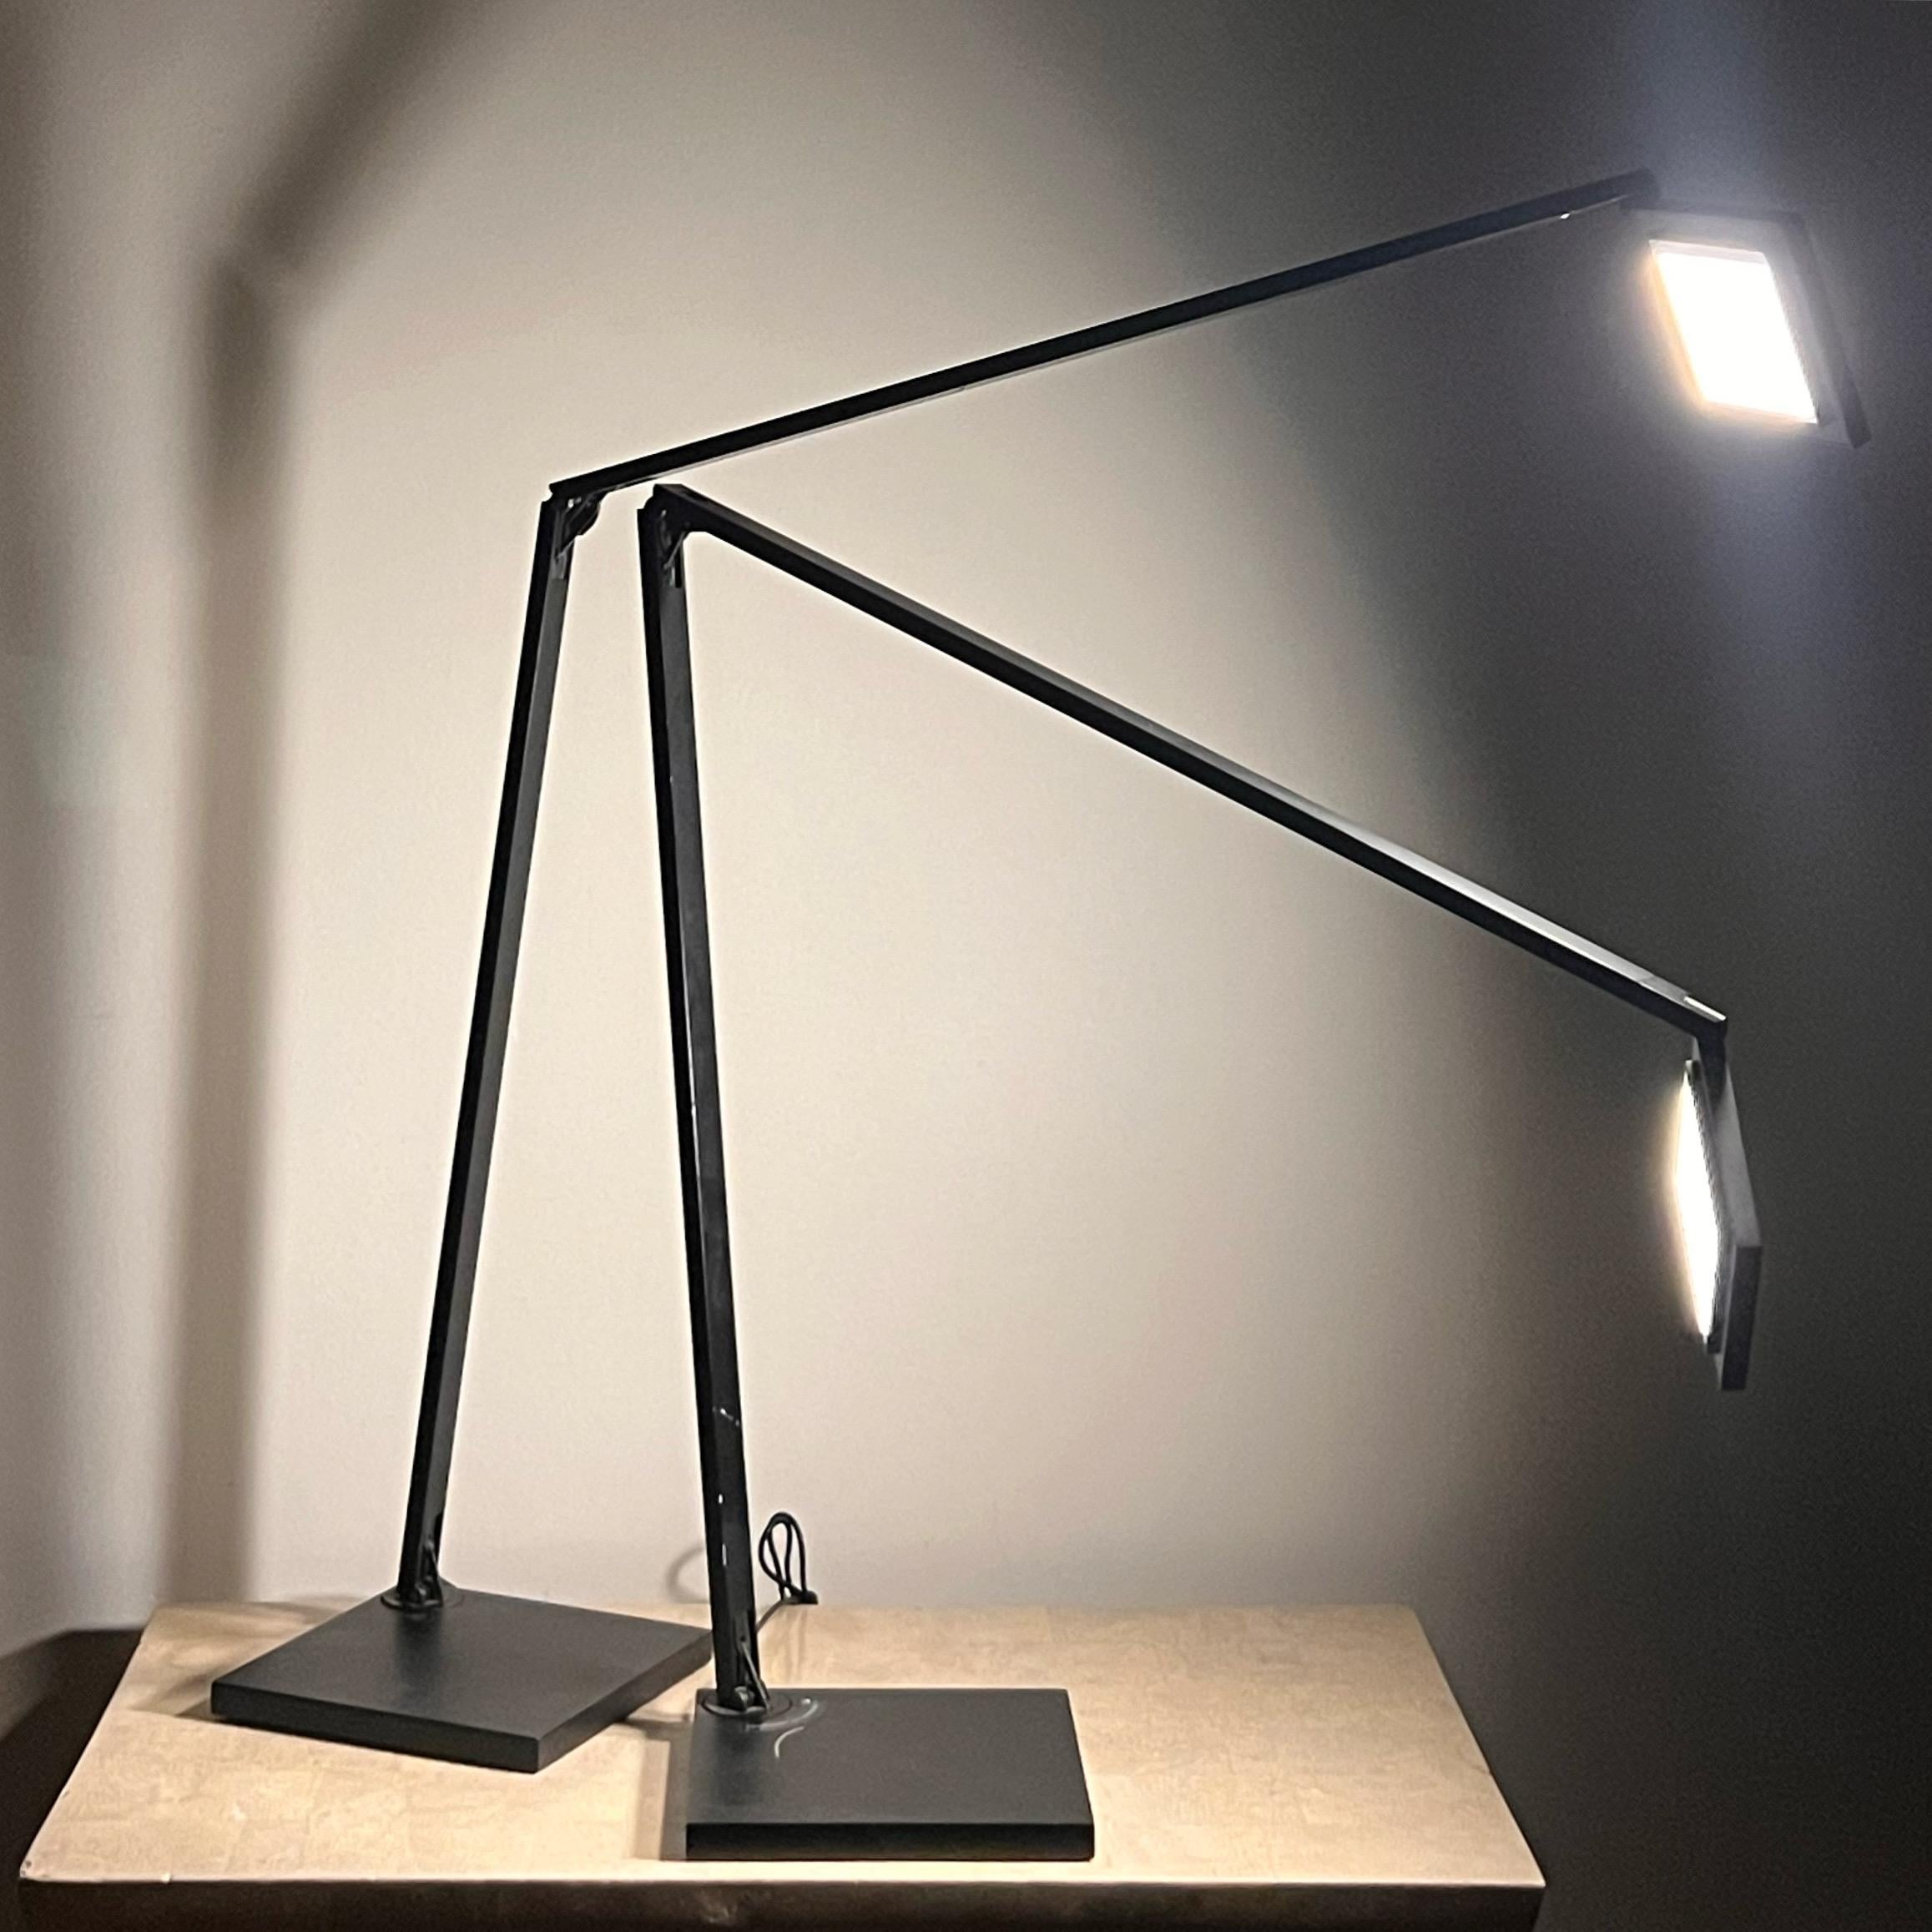 A pair of Quattro modernist task lamps by Sonneman, a Way of Light, early 21st century. Adjustable arm swings 90degrees, and LED lights are tapped to access three lighting settings. Minor signs of age including scuffing on bases, and one of the arms